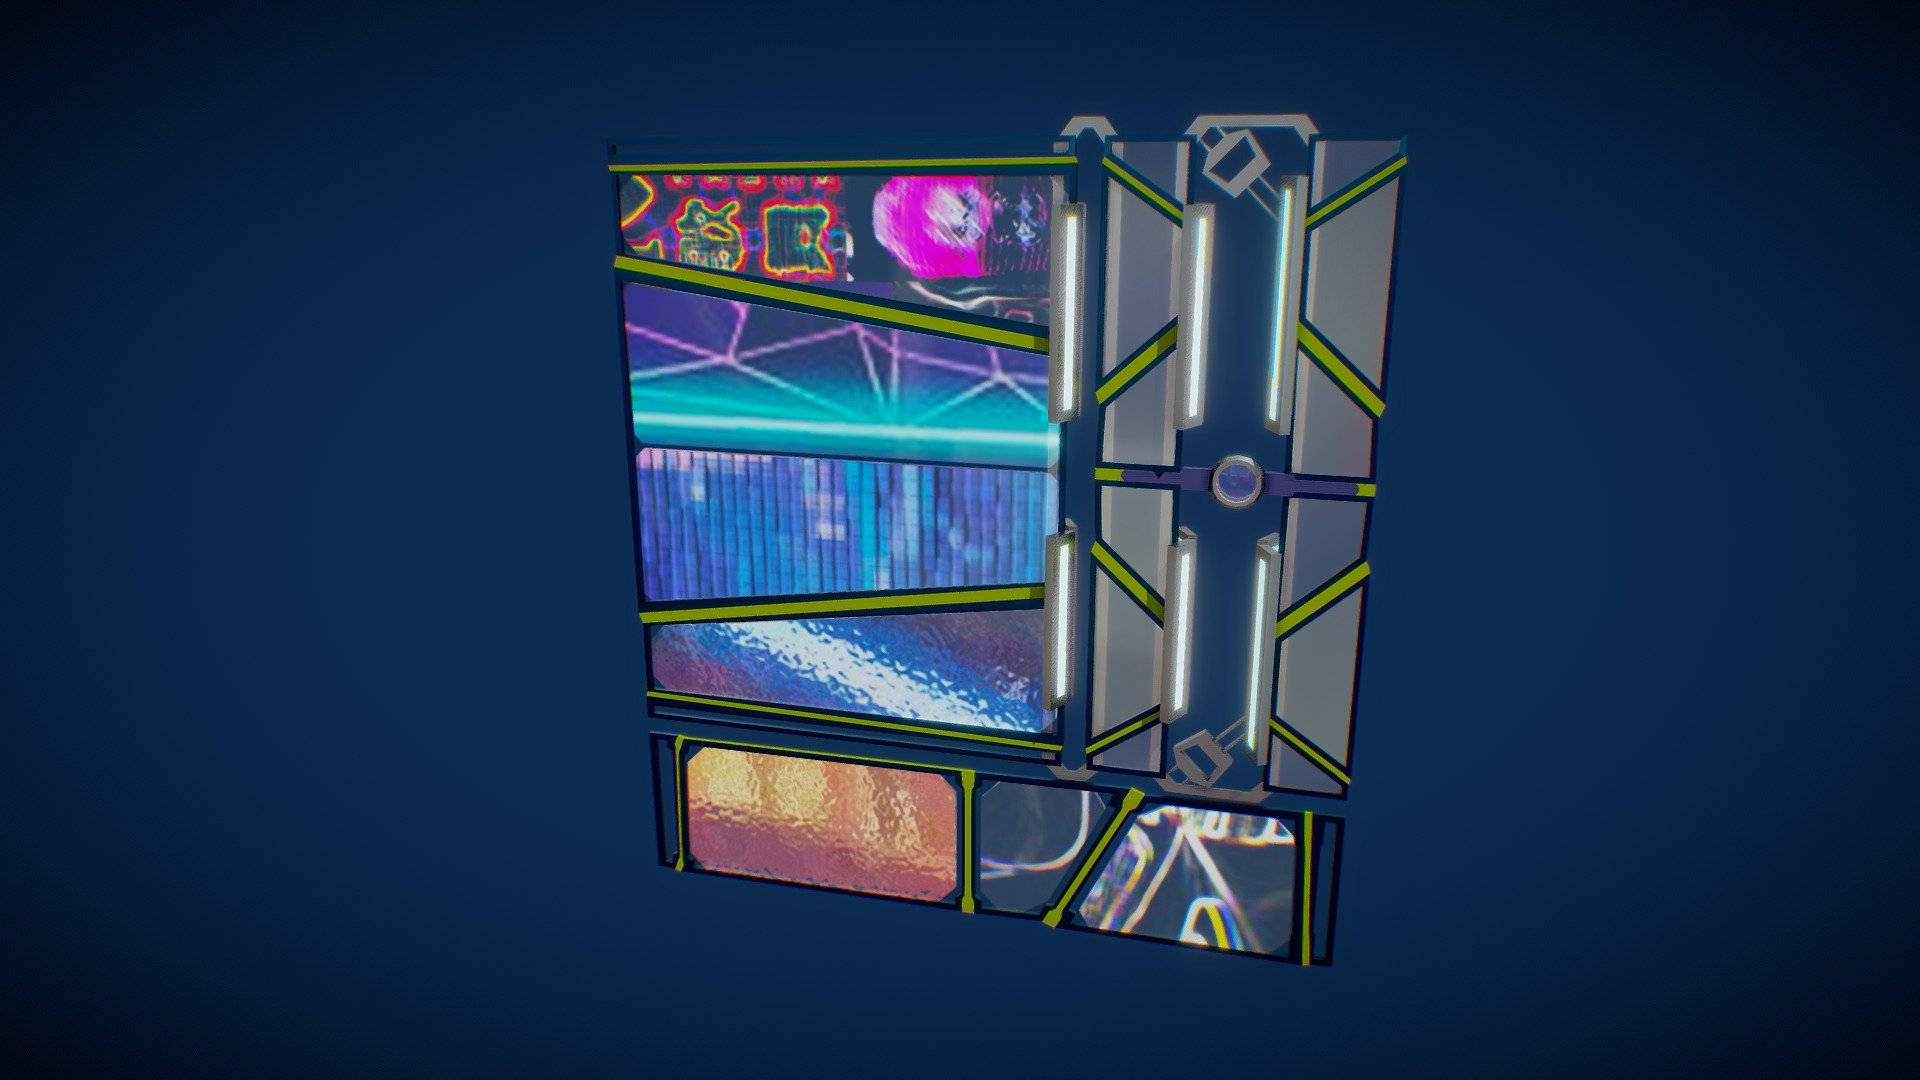 Stylized Low Poly Sci Fi Billboard

Model made with blender 3.0. File attached as .zip file.
Blender file has a version with modifiers not applied for easy changes and modifications like sign size 3d model